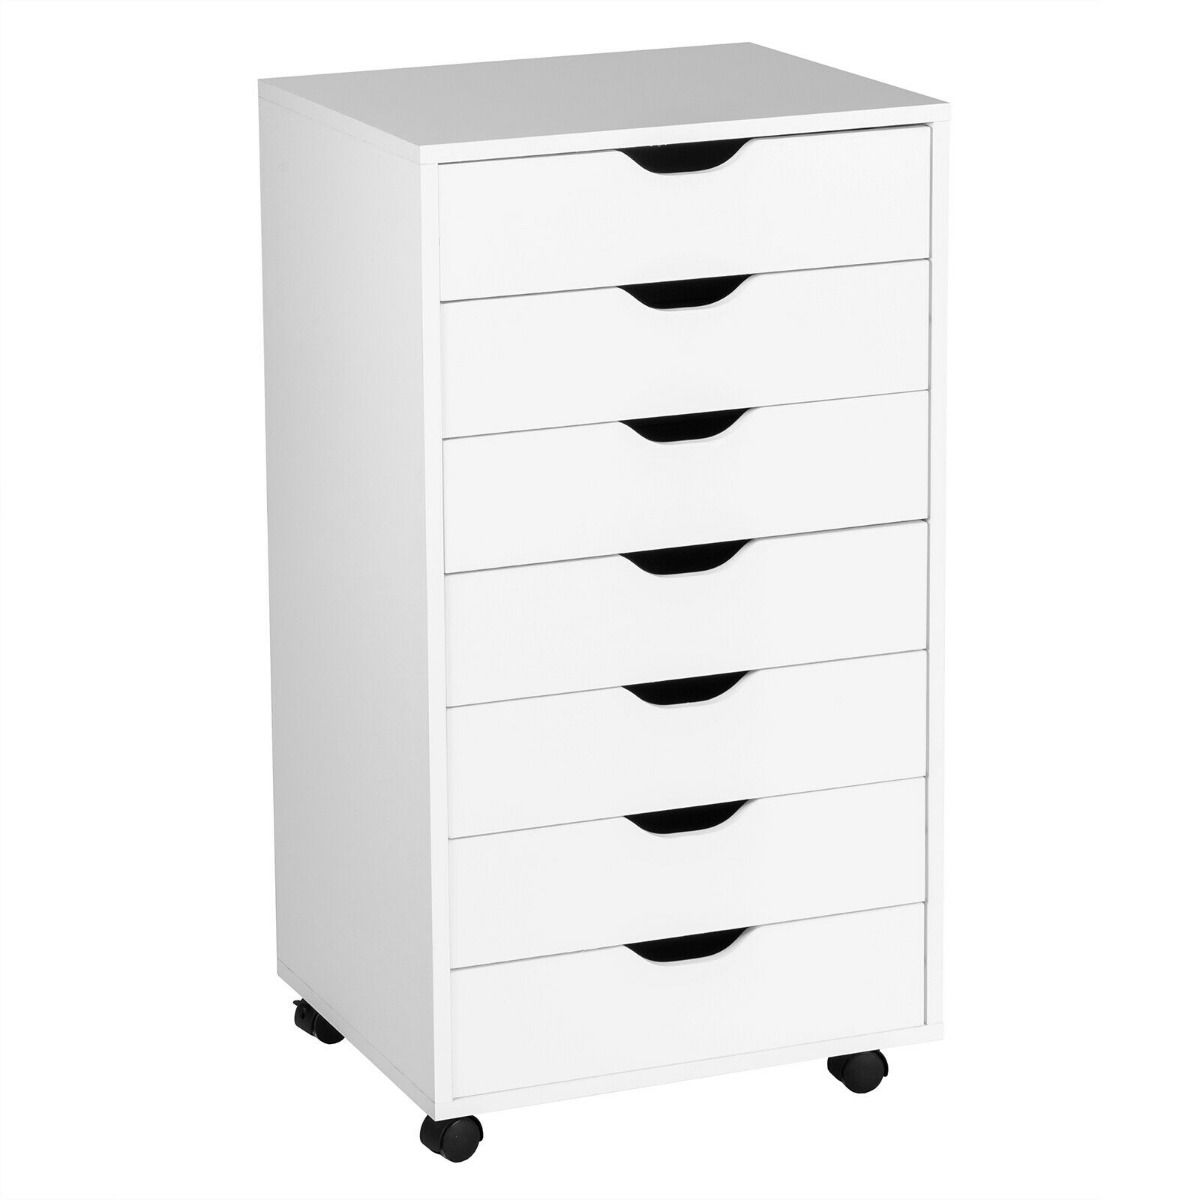 Mobile File Cabinet on Wheels with 7 Drawers